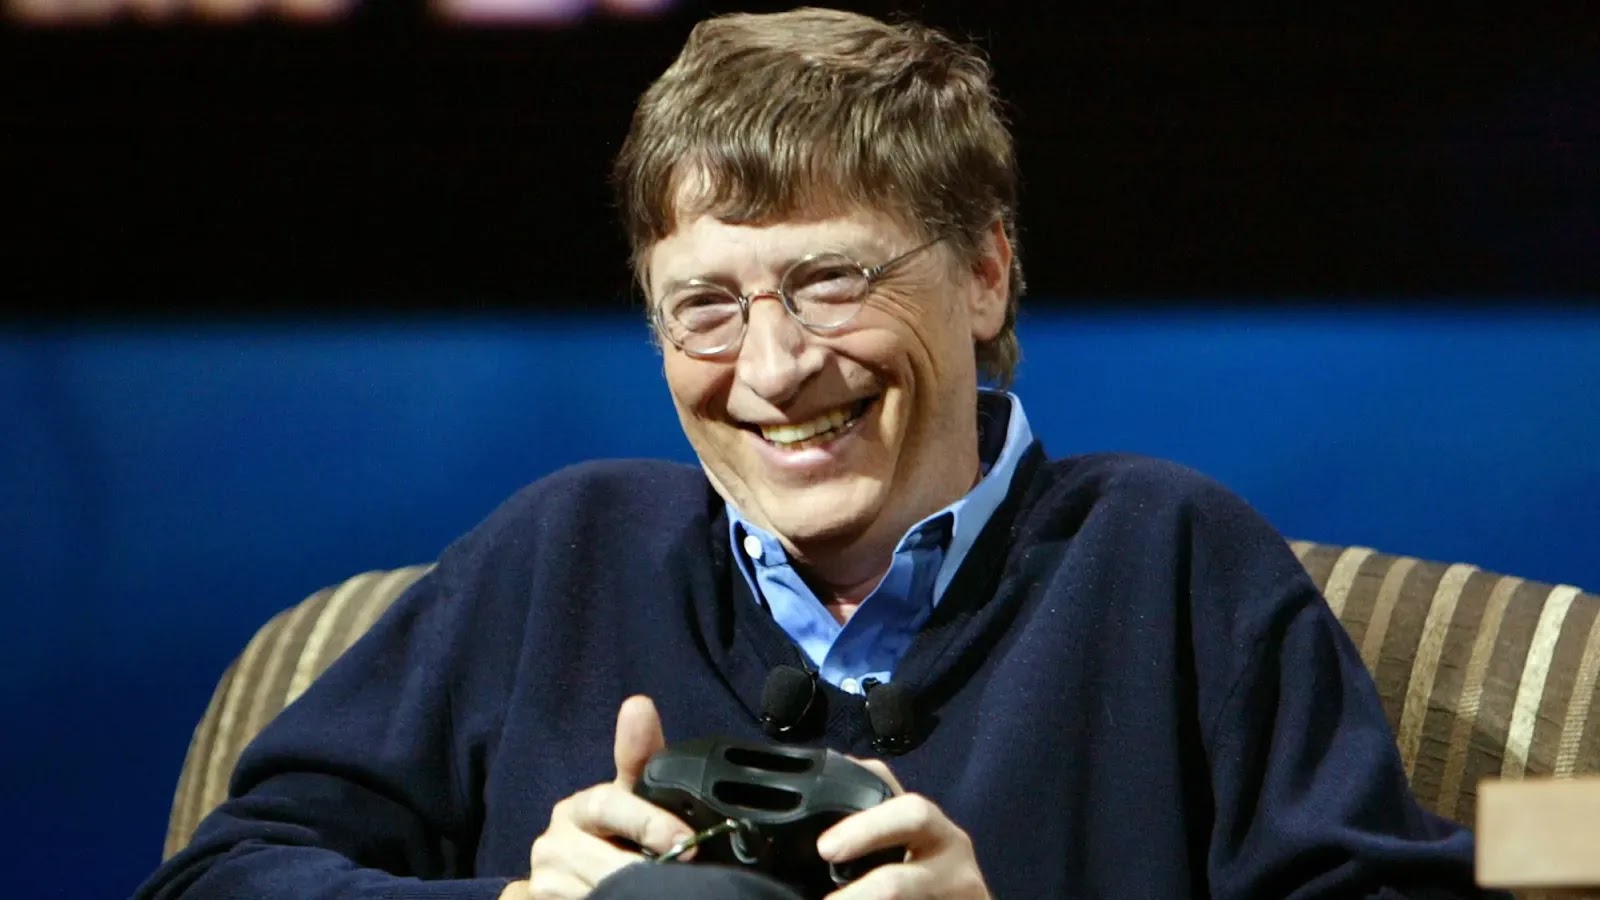 Bill Gates Embracing Gaming as a Metaphor for Human Connection